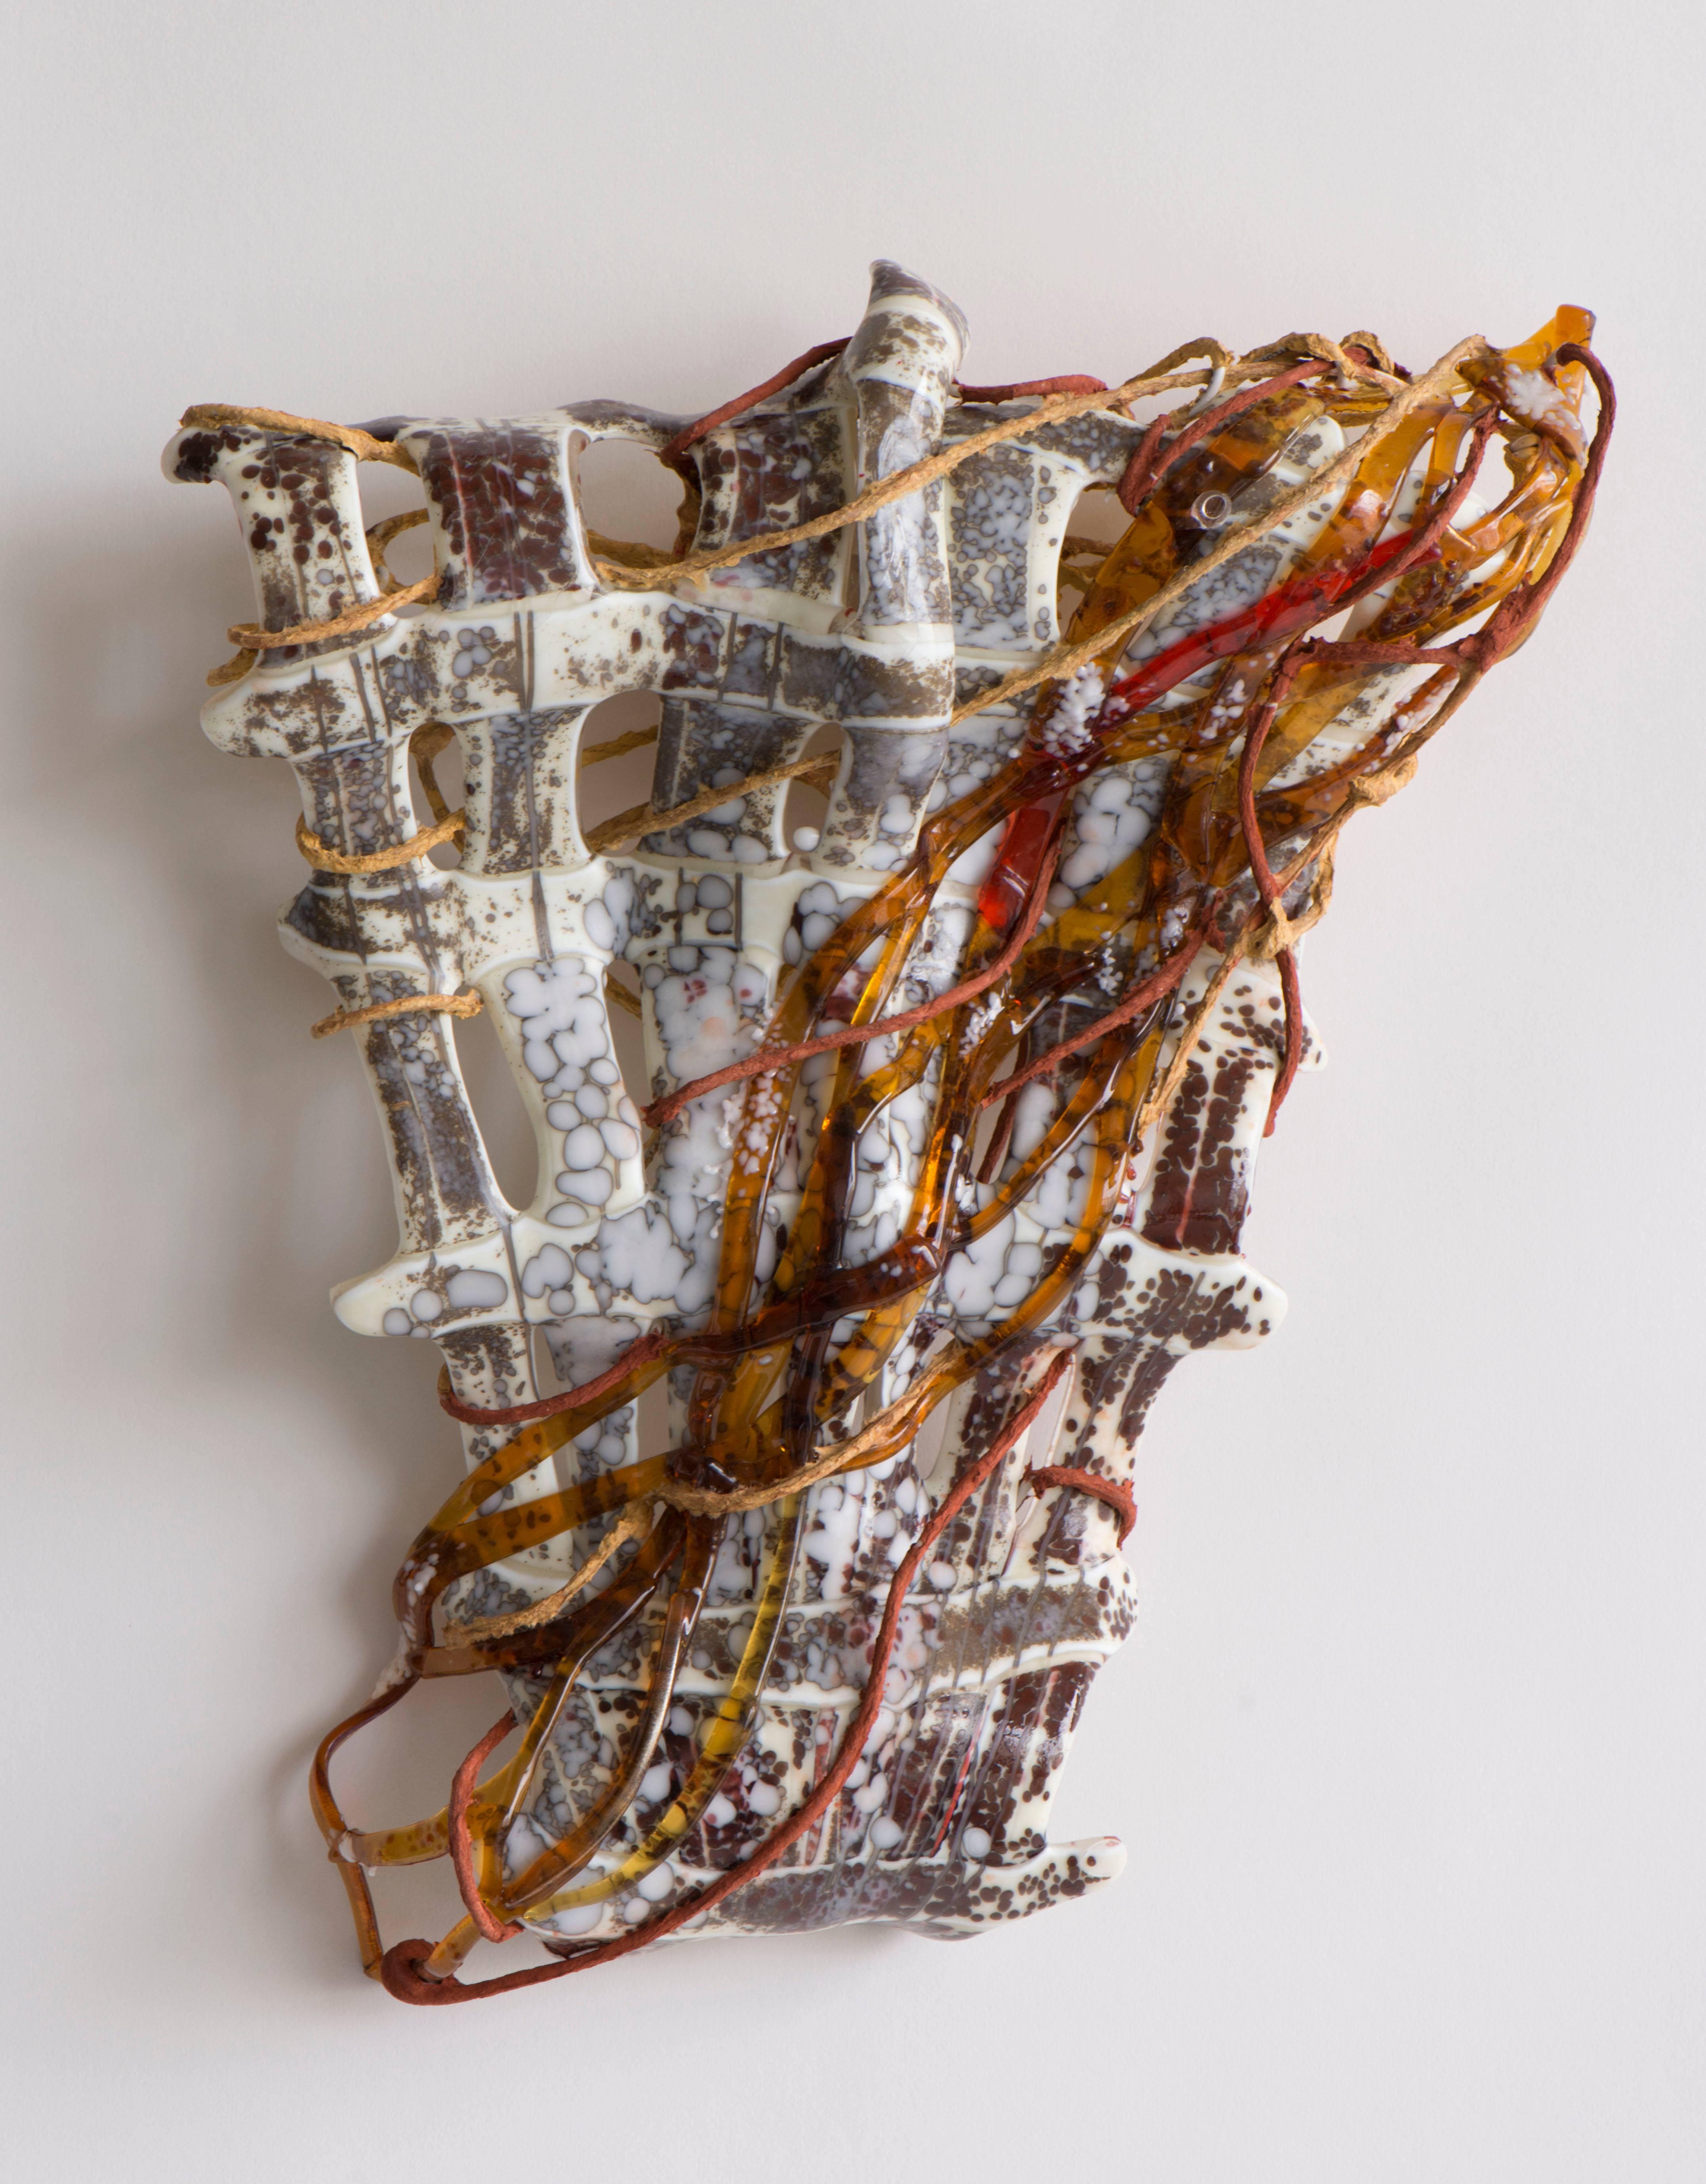 Nancy Cohen
Retained, 2017
glass, wire and handmade paper
16 x 13 x 4 in.

This abstract wall sculpture features white and copper glass mixed with metals and Cohen's signature handmade paper to form a unique biomorphic creation informed by Cohen's